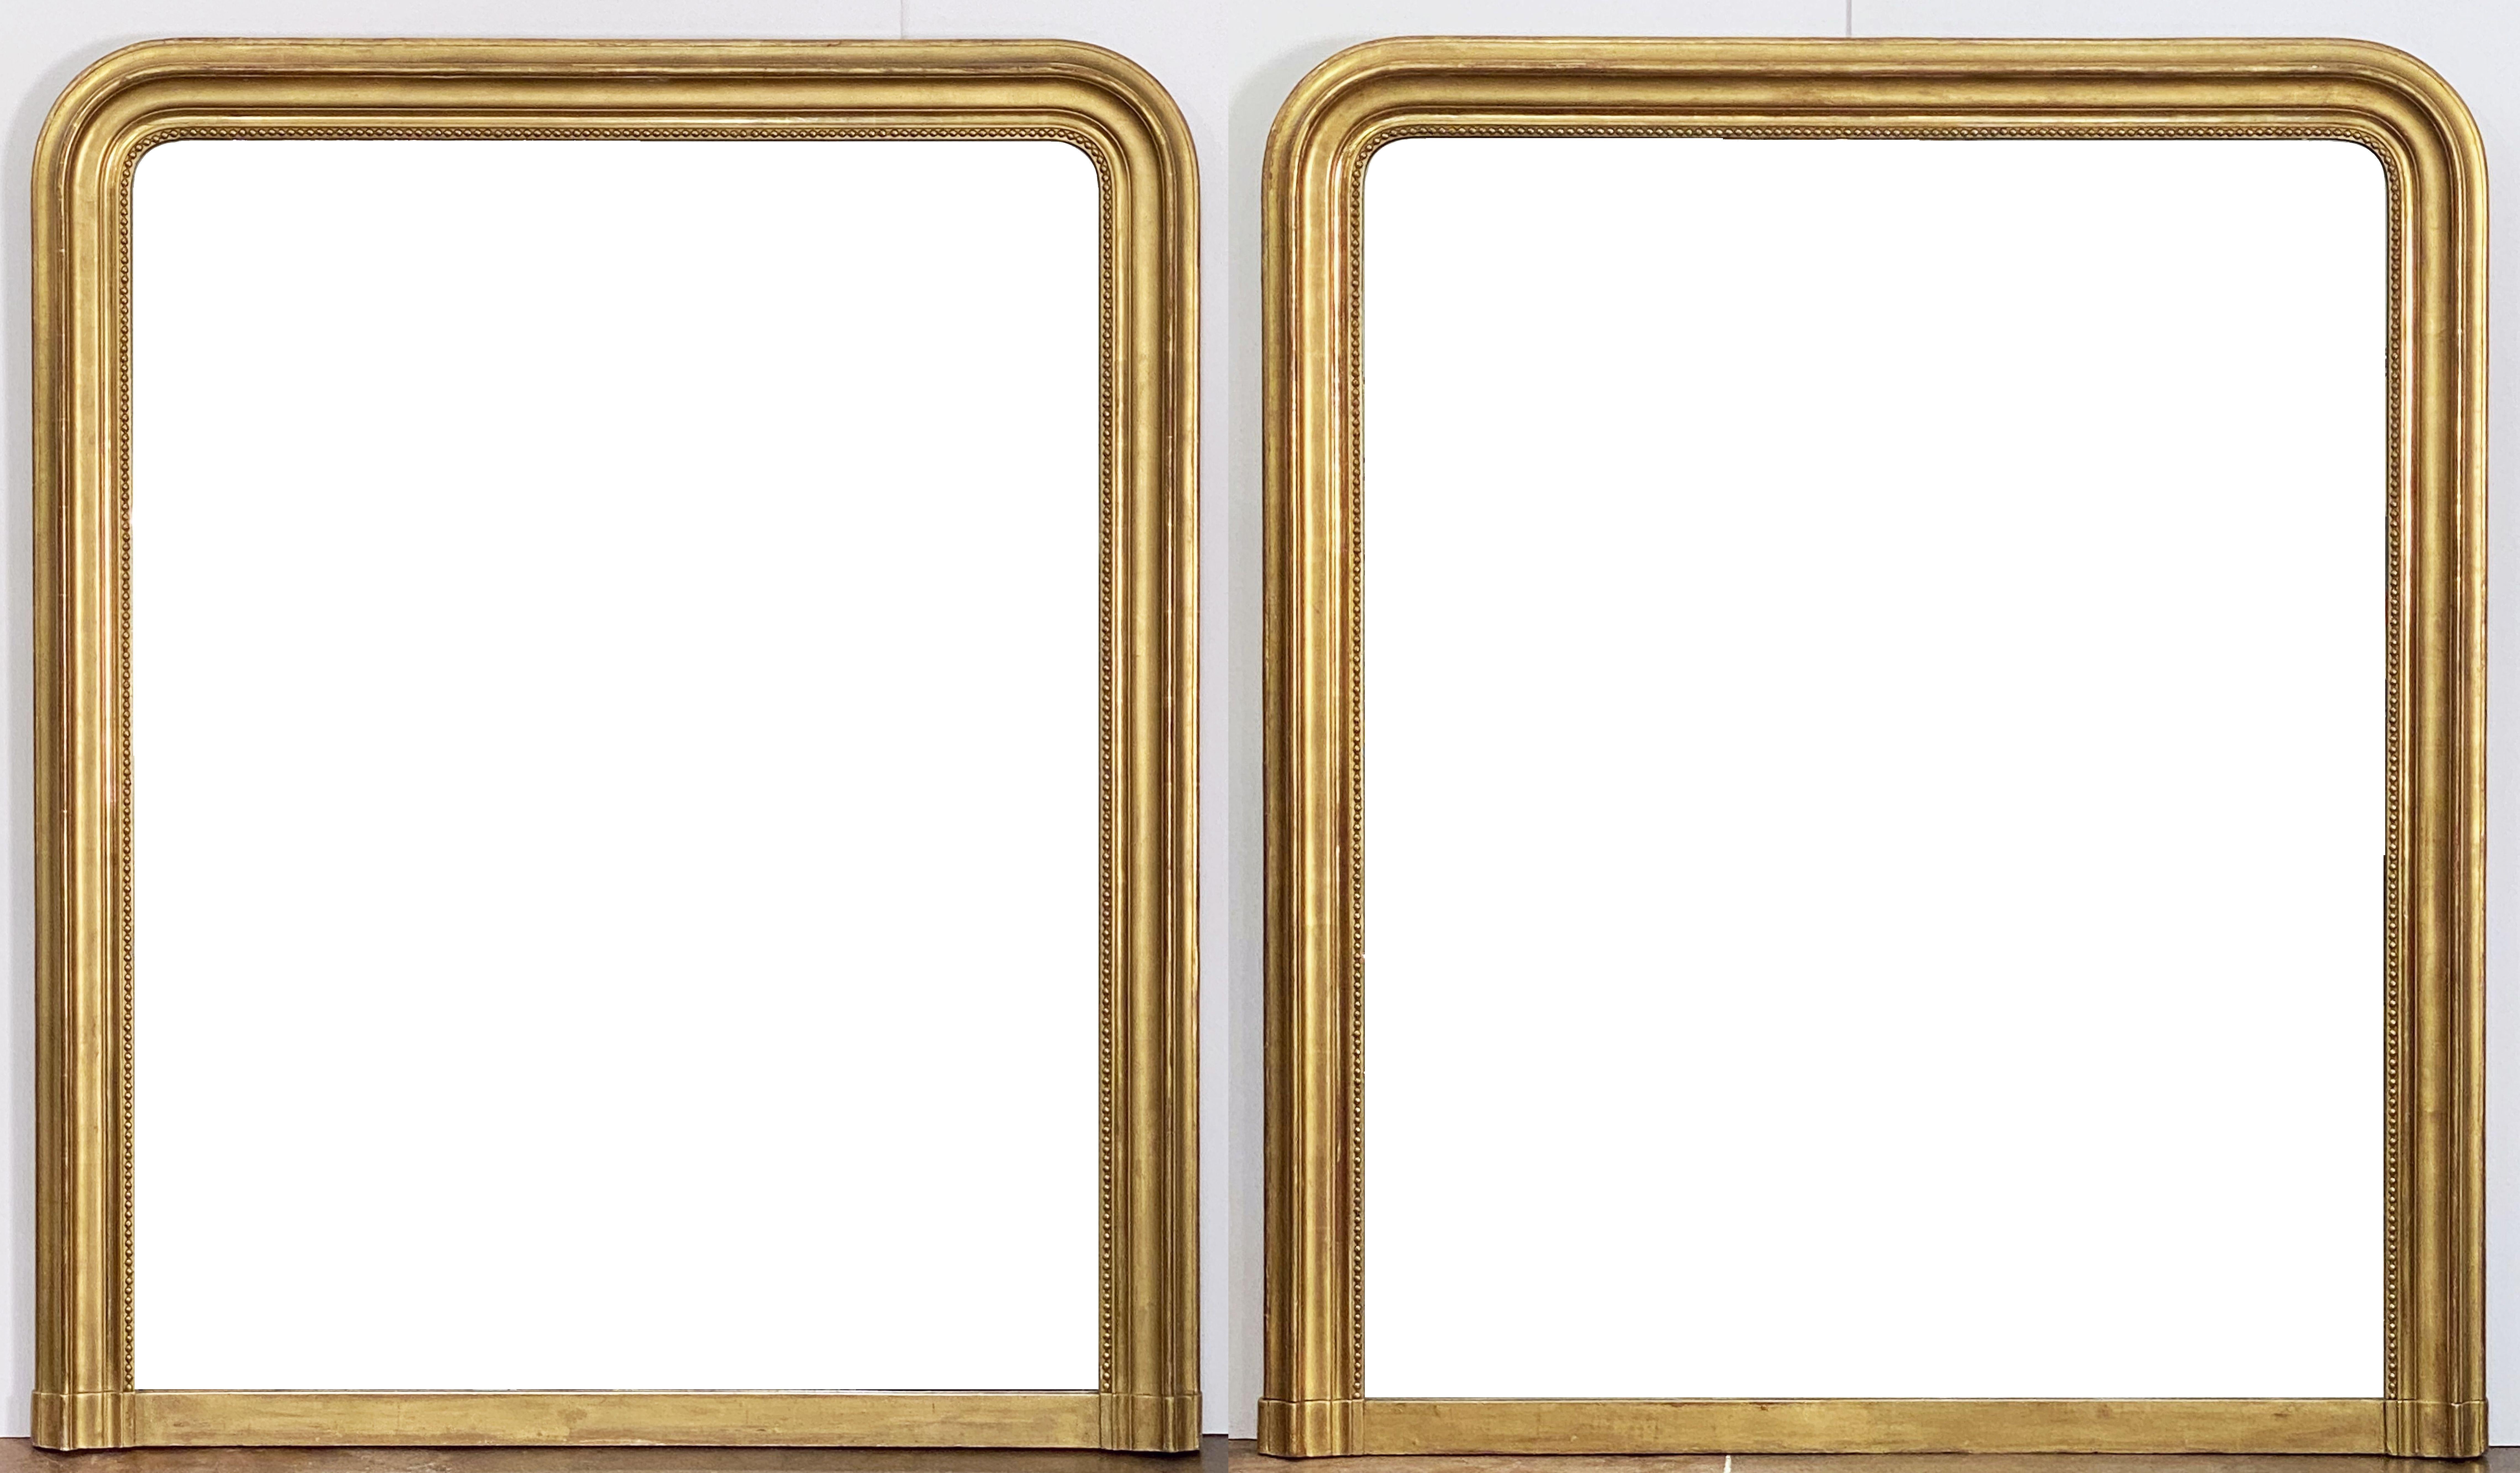 A fine large Louis Philippe gilt wall mirror featuring a lovely moulded surround of patinated gold leaf with a beaded trim around the inside frame.

Dimensions: H 52 inches x W 43 1/2 inches

There are two mirrors of this design and general size